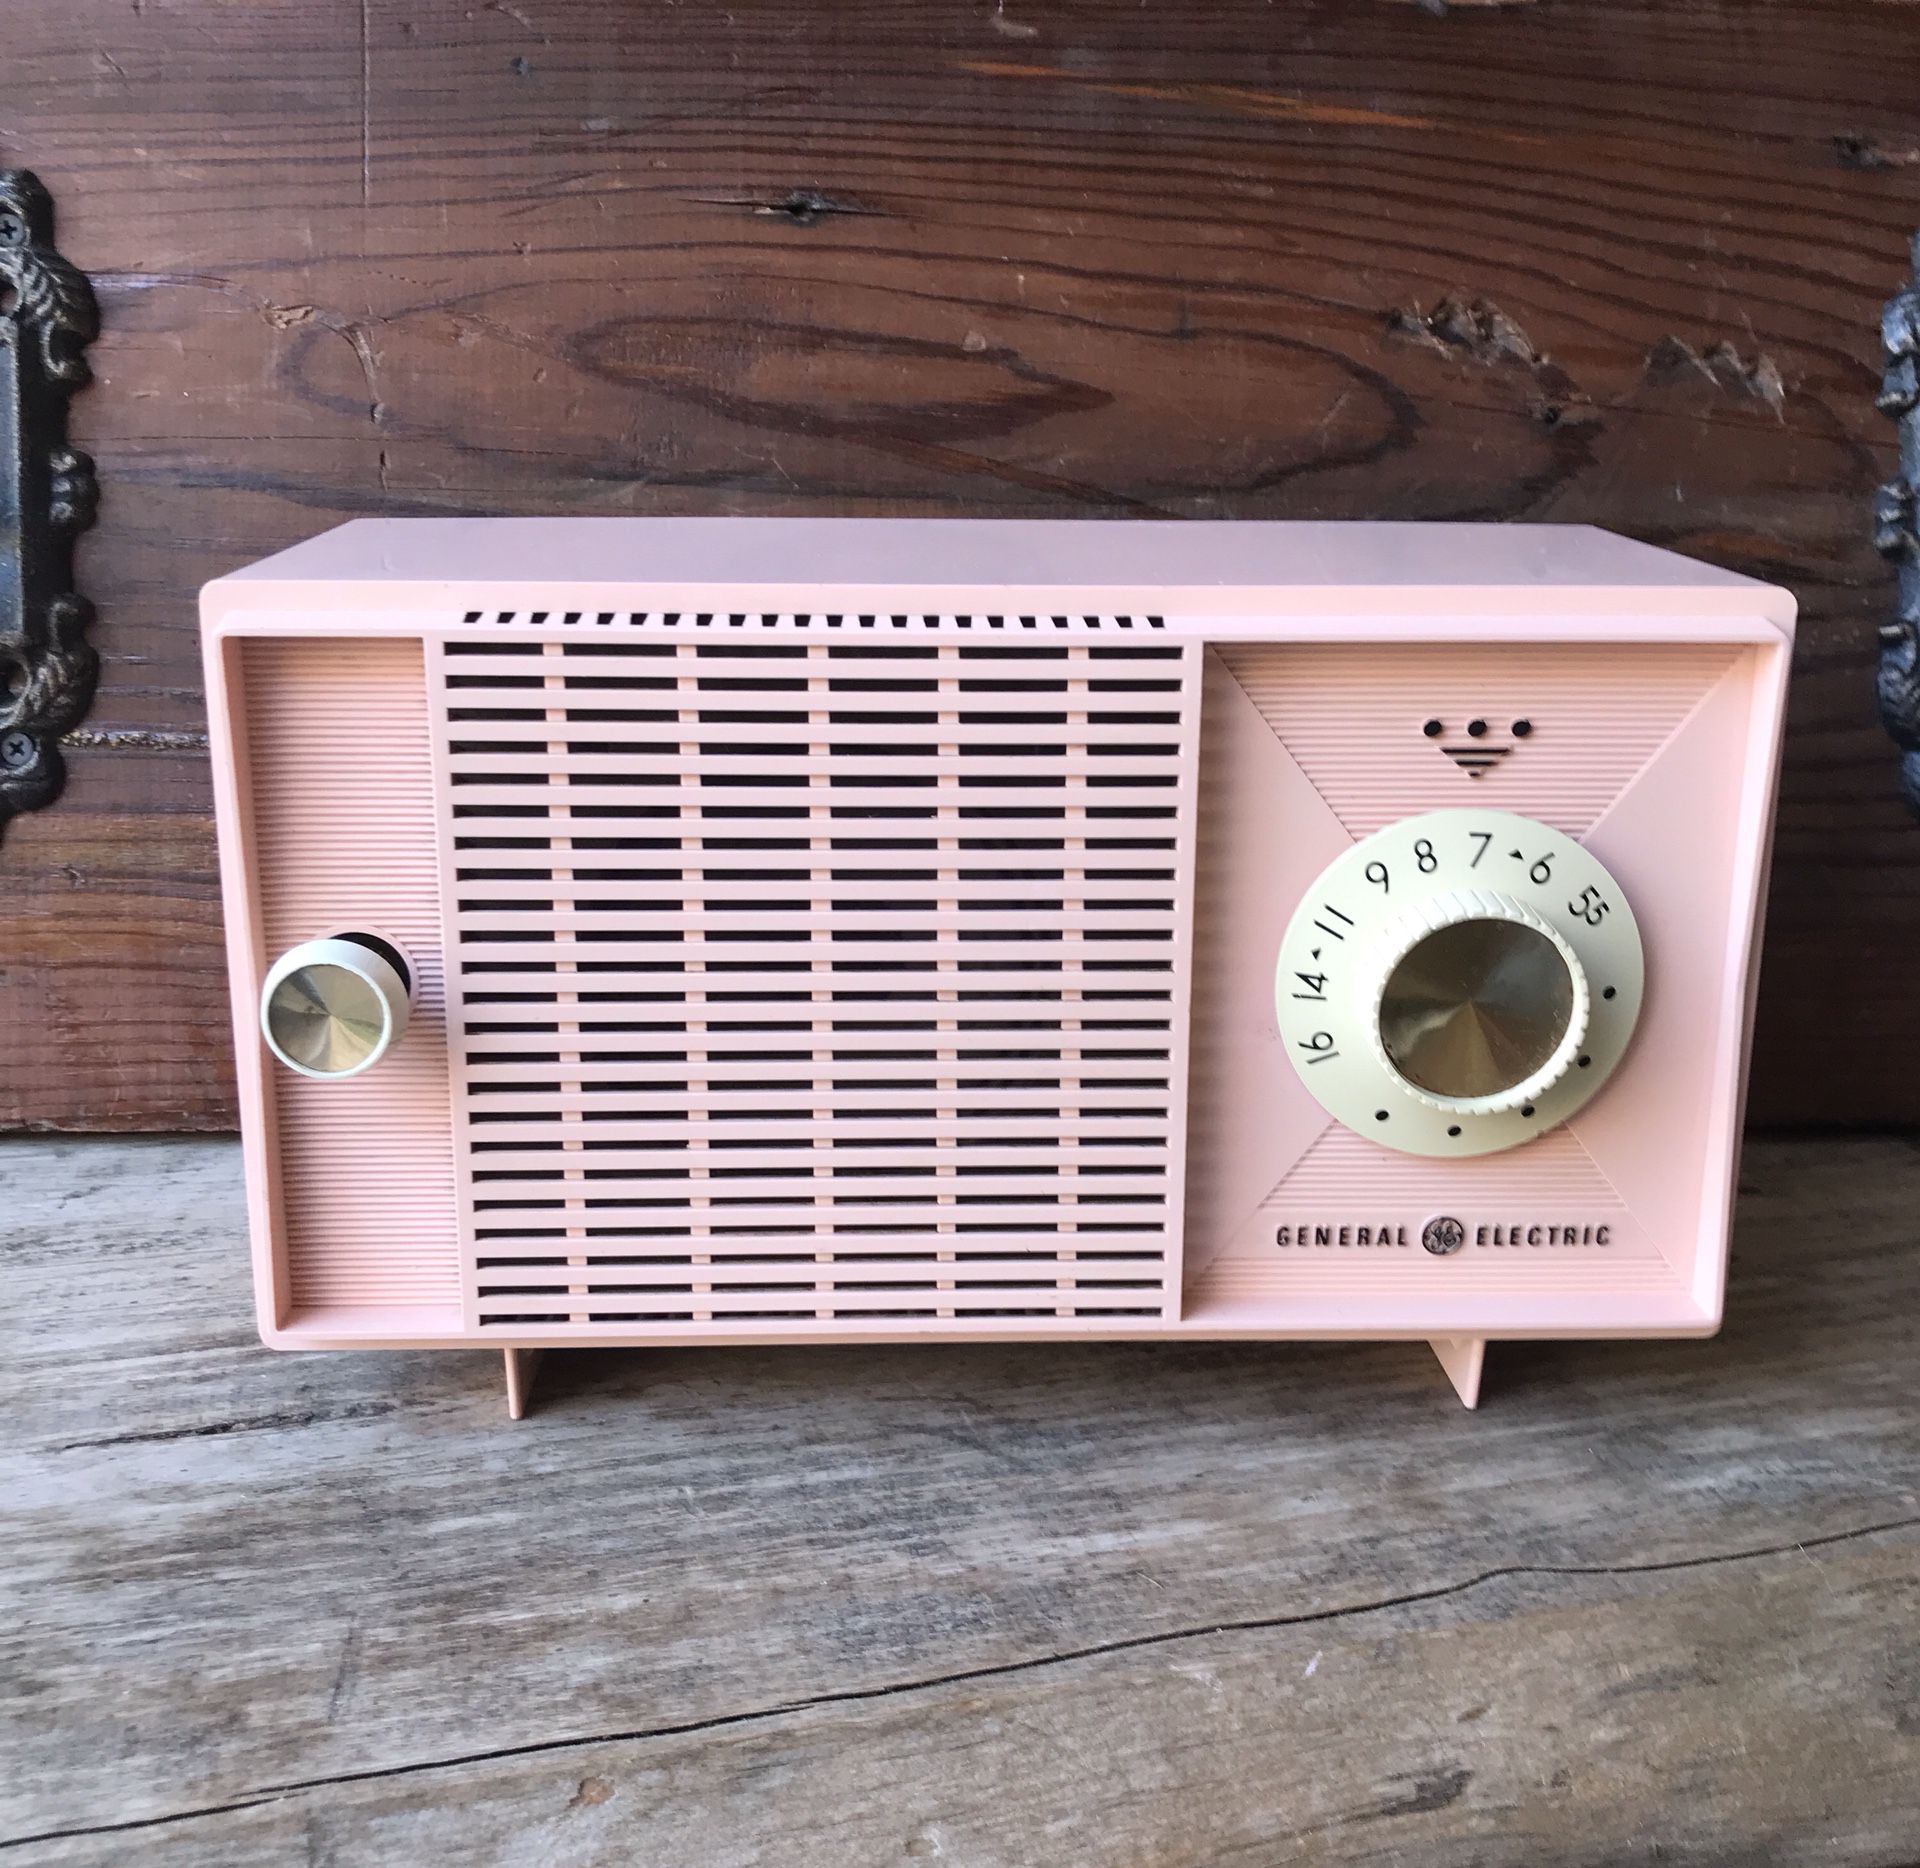 1950s General Electric Radio for Sale Fort Worth, TX - OfferUp